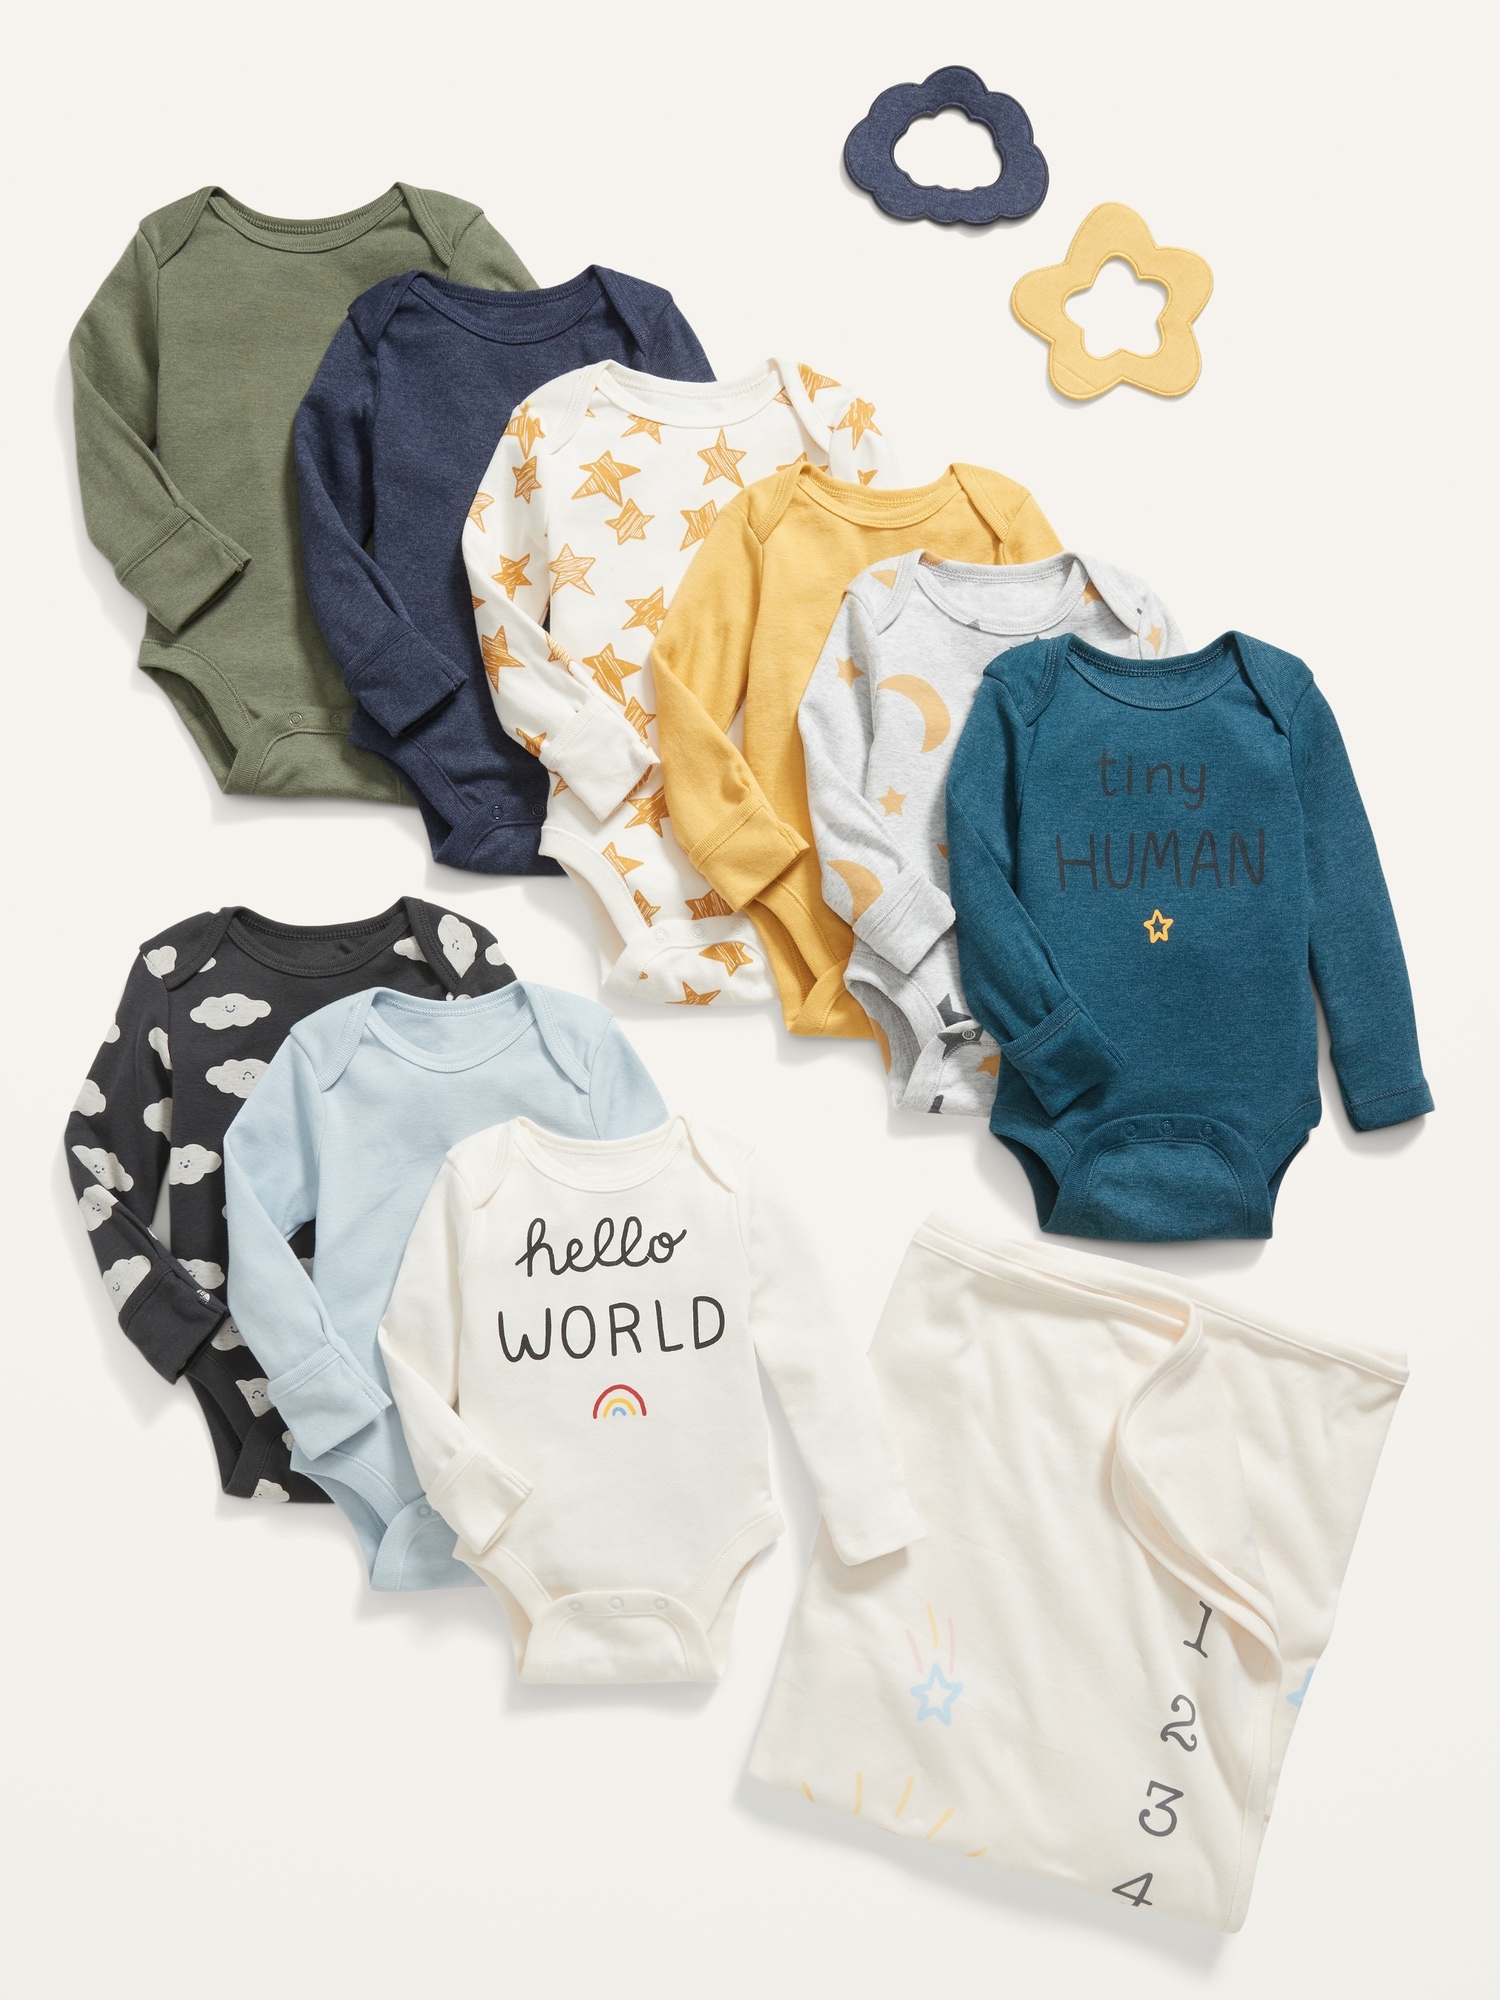 Old Navy Layette Baby Sets:12-Piece Grow-With-Me Milestone Set w/ Long-Sleeve Bodysuits $25, 5-Piece Holiday Set (NB or 0-3M) $9 + FS $50+